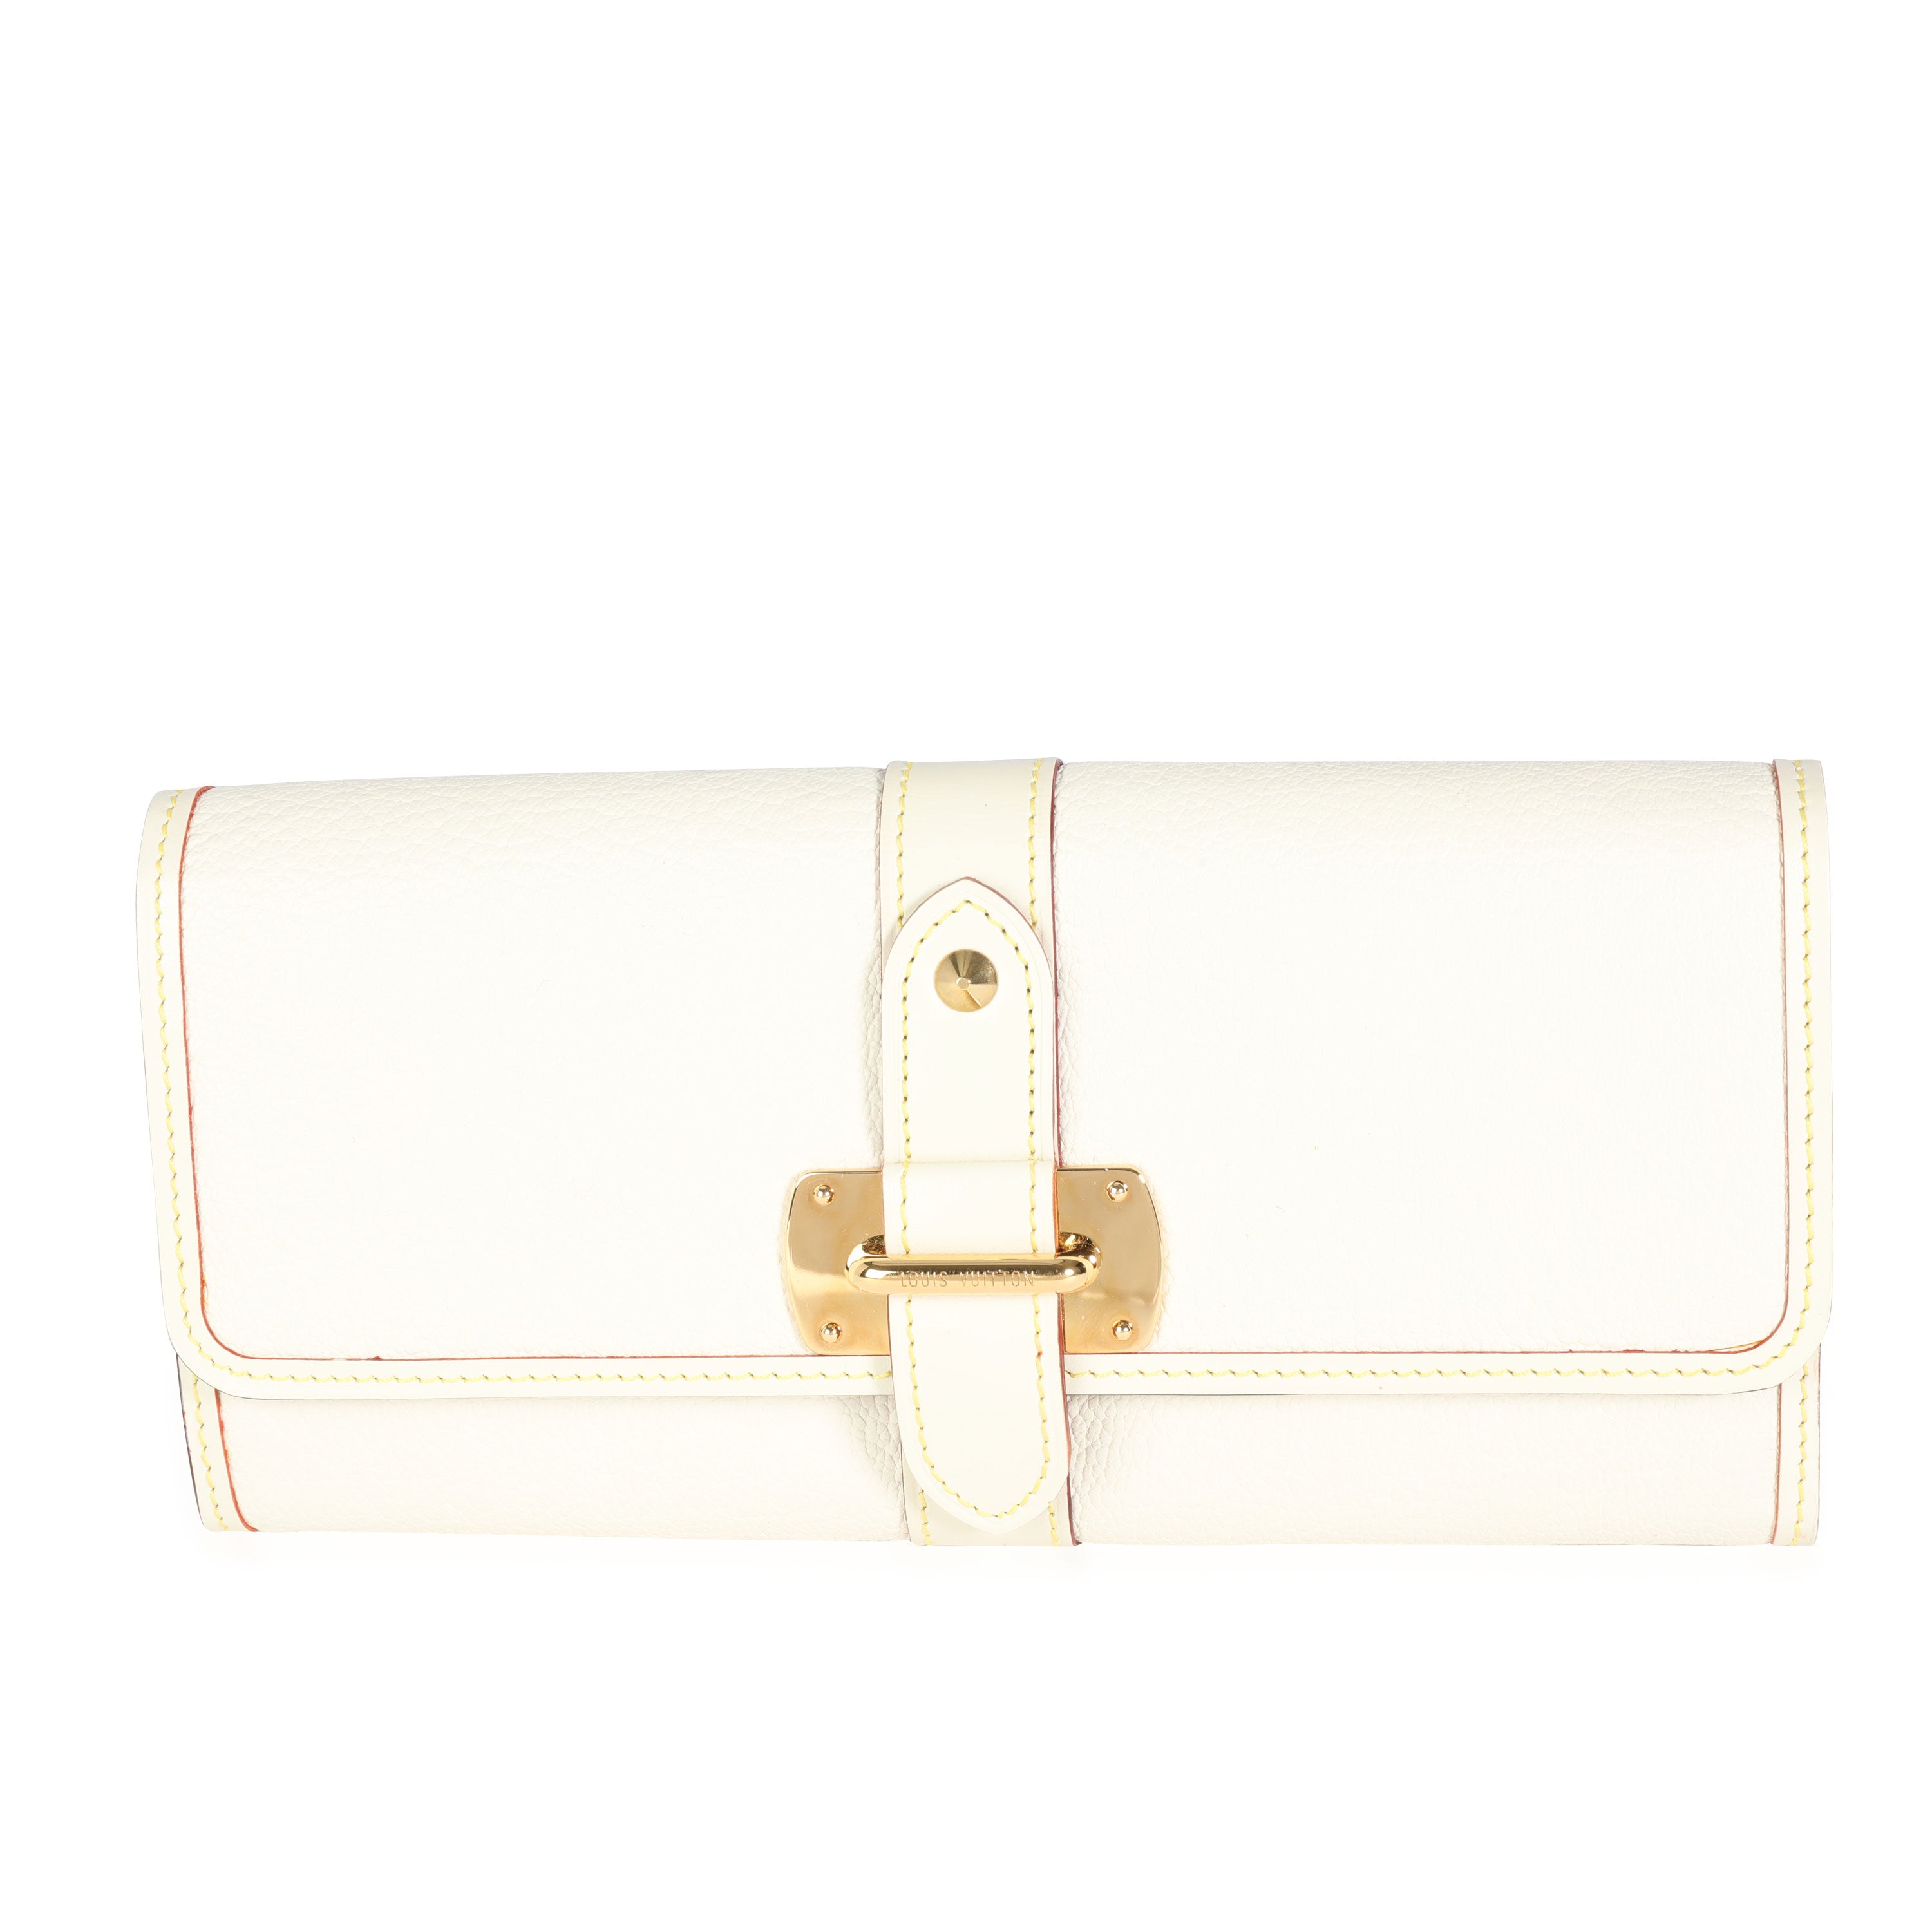 White Suhali leather Louis Vuitton Le Favori wallet with brass hardware